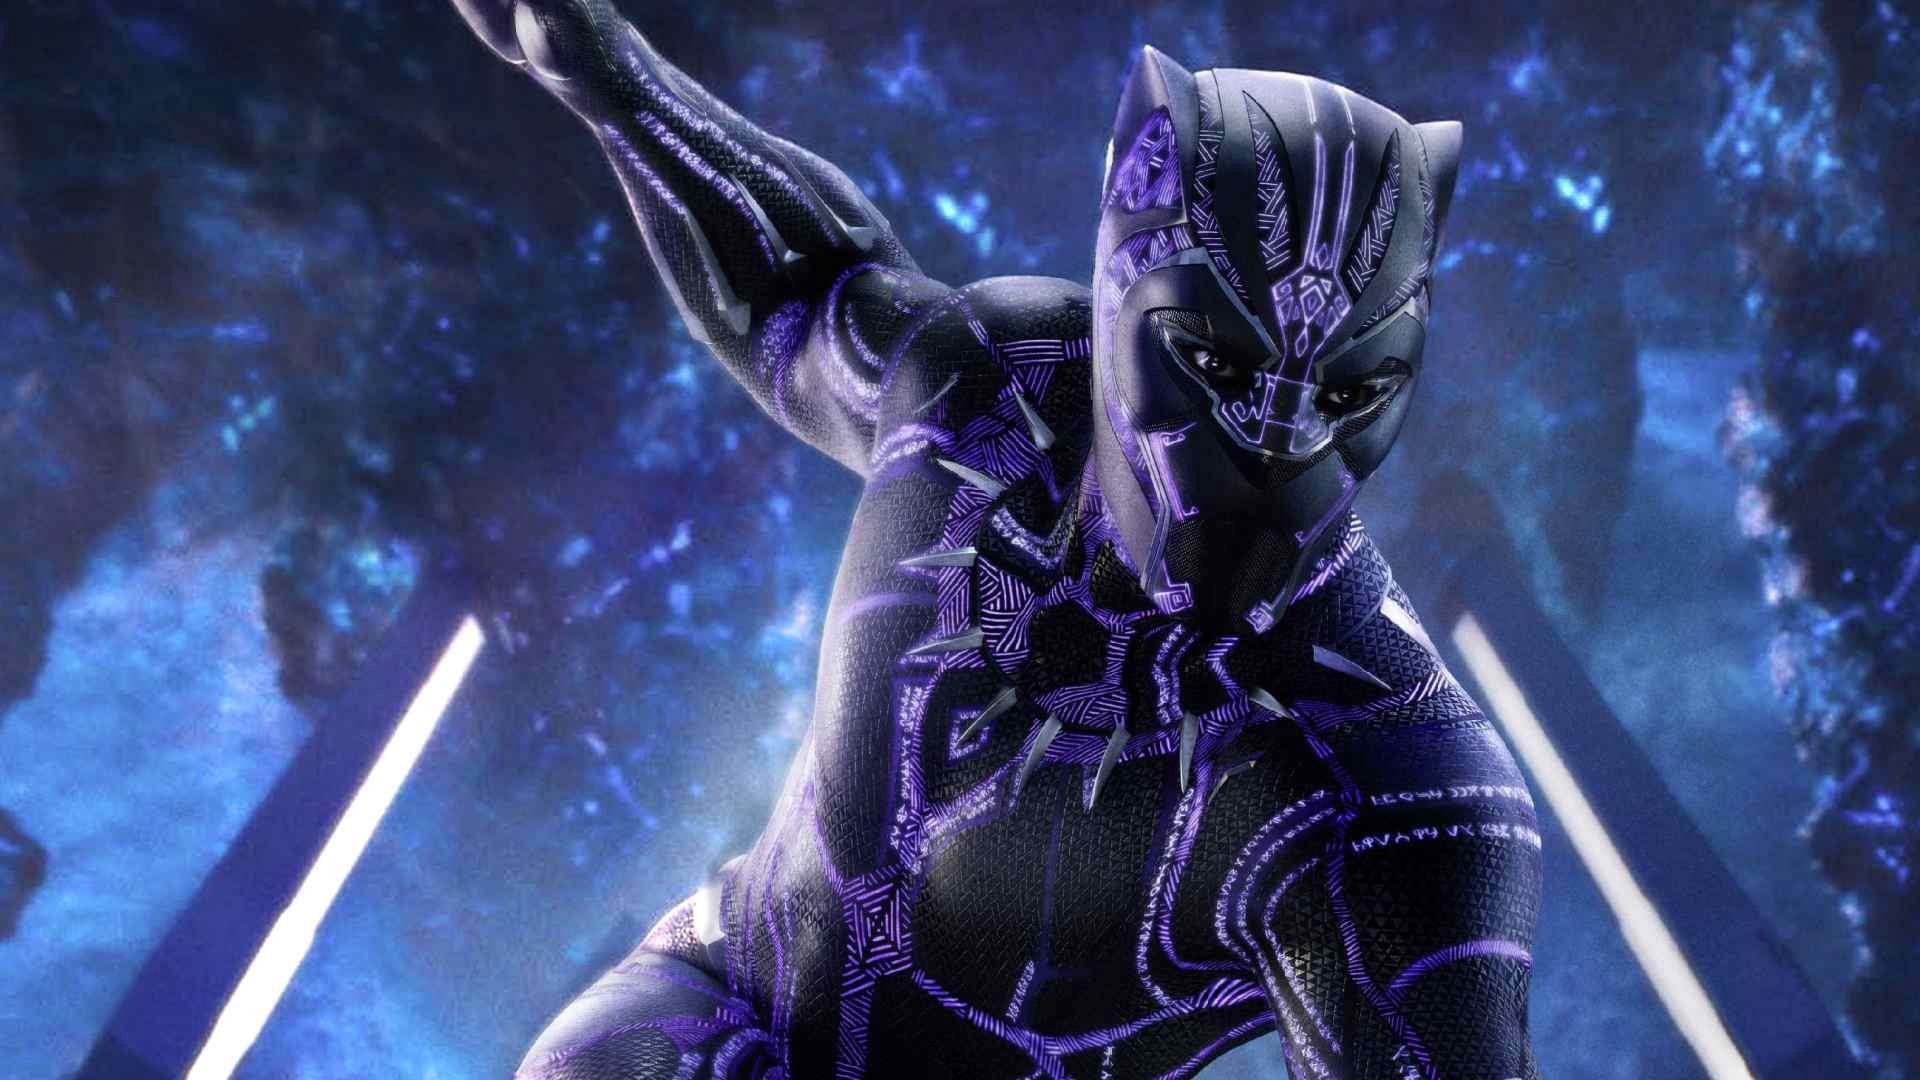 Black Panther Wallpaper HD. You can download many types of